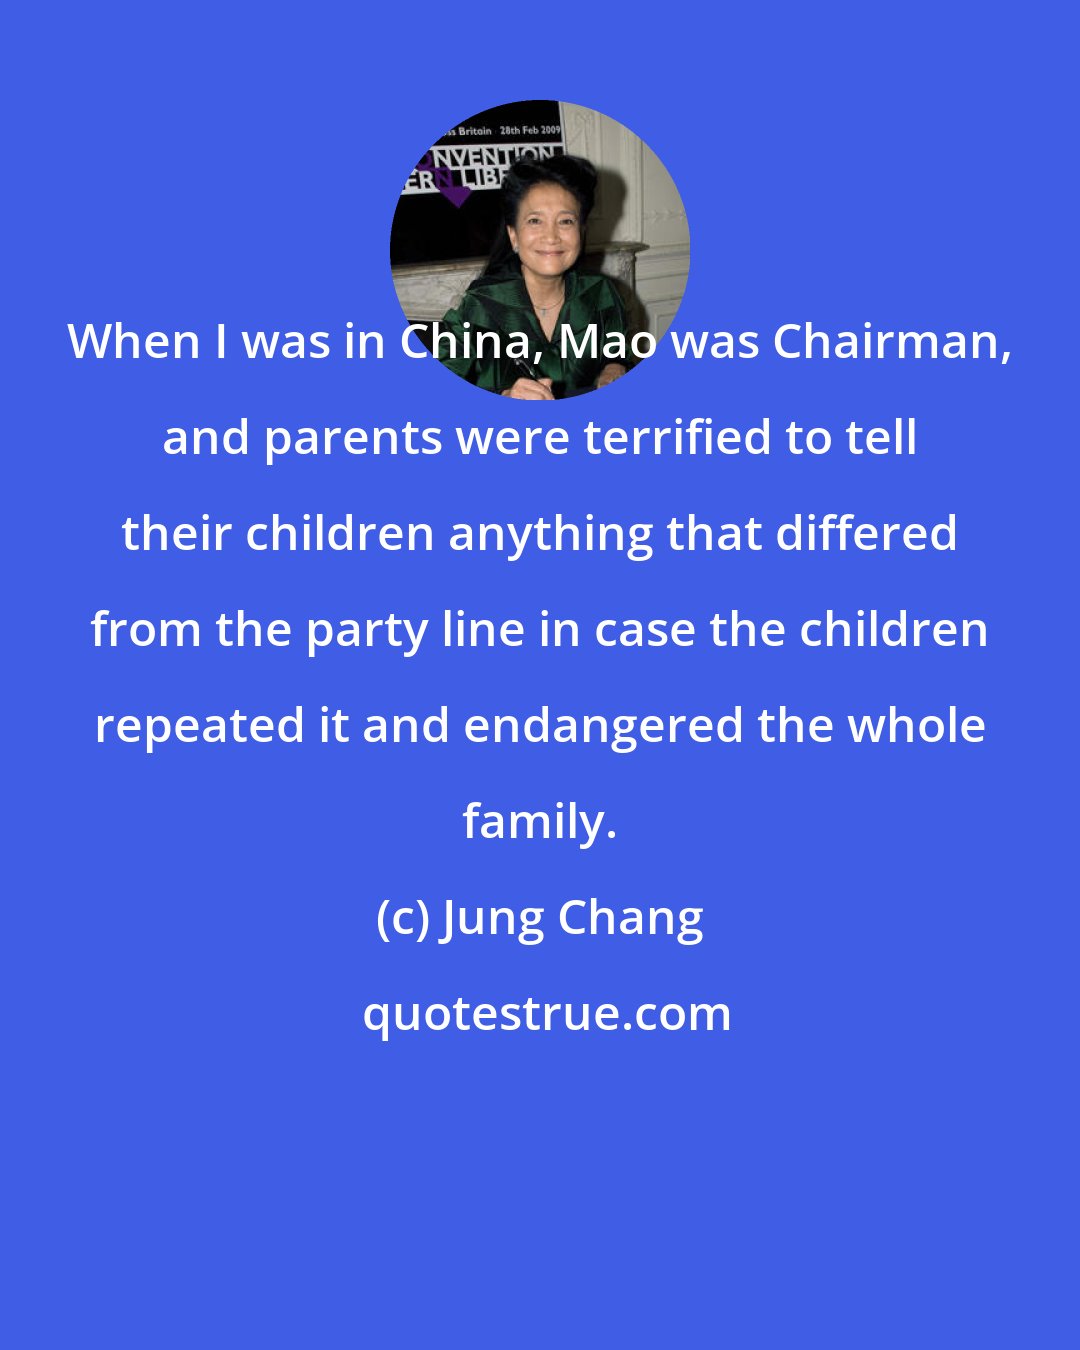 Jung Chang: When I was in China, Mao was Chairman, and parents were terrified to tell their children anything that differed from the party line in case the children repeated it and endangered the whole family.